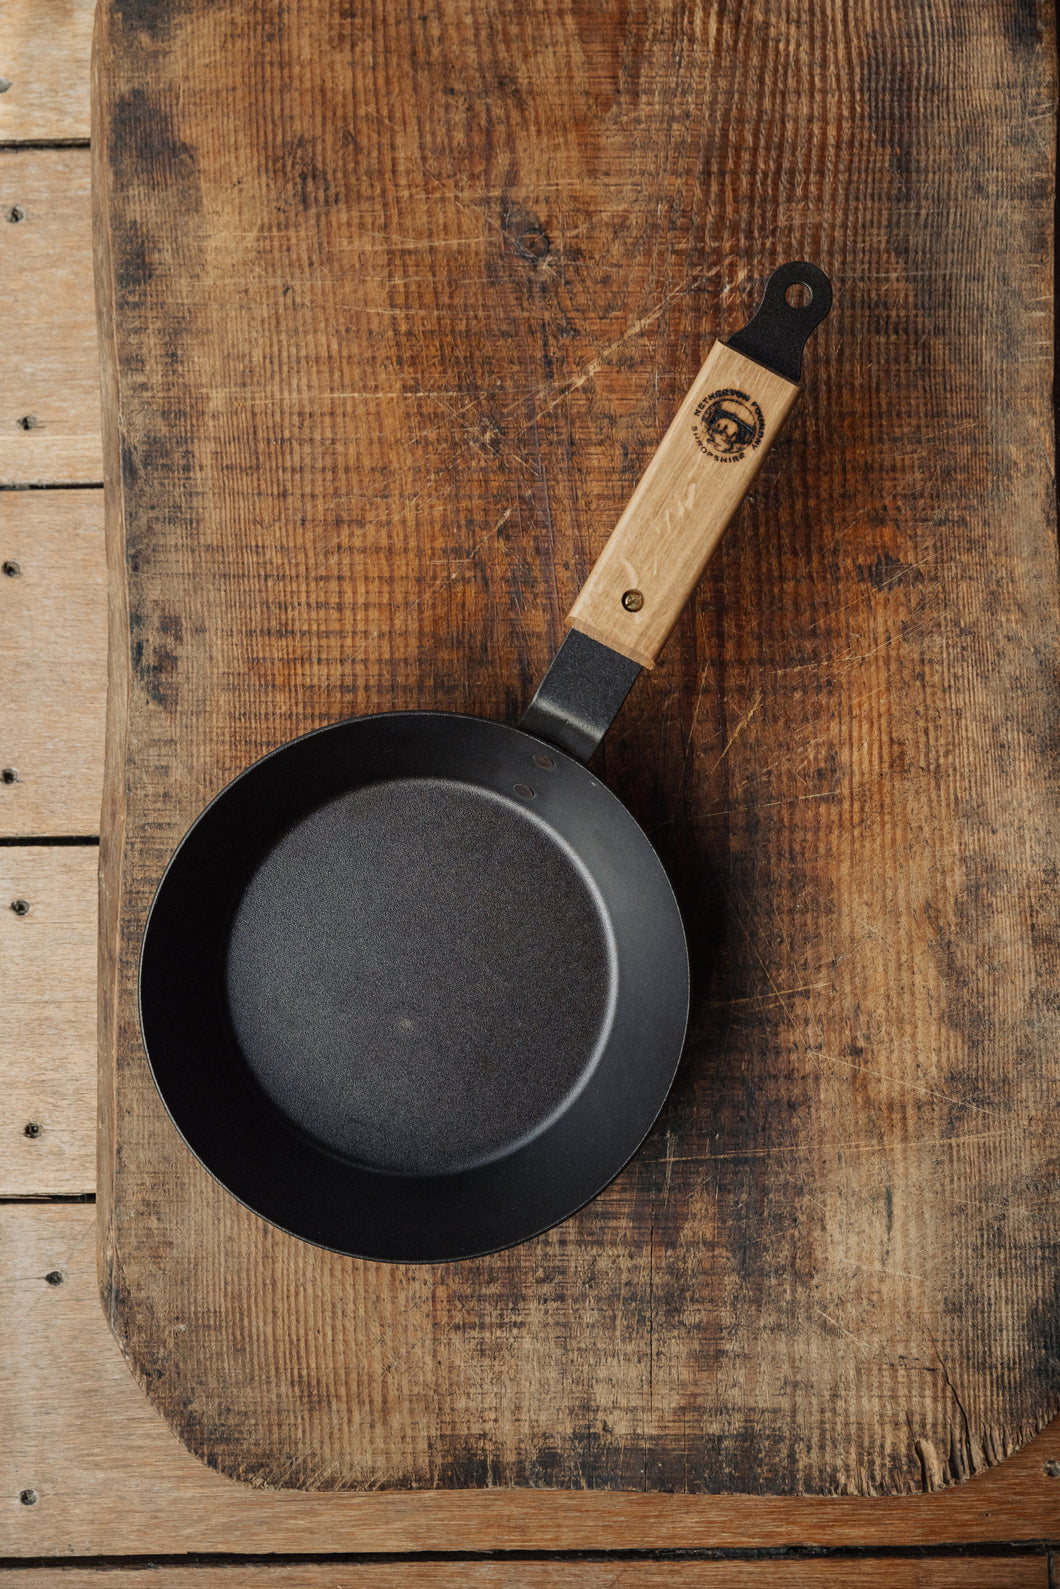 Shop with Settle | Netherton Foundry - overview of a black, hand-spun cast iron glamping pan with wooden oak handle.